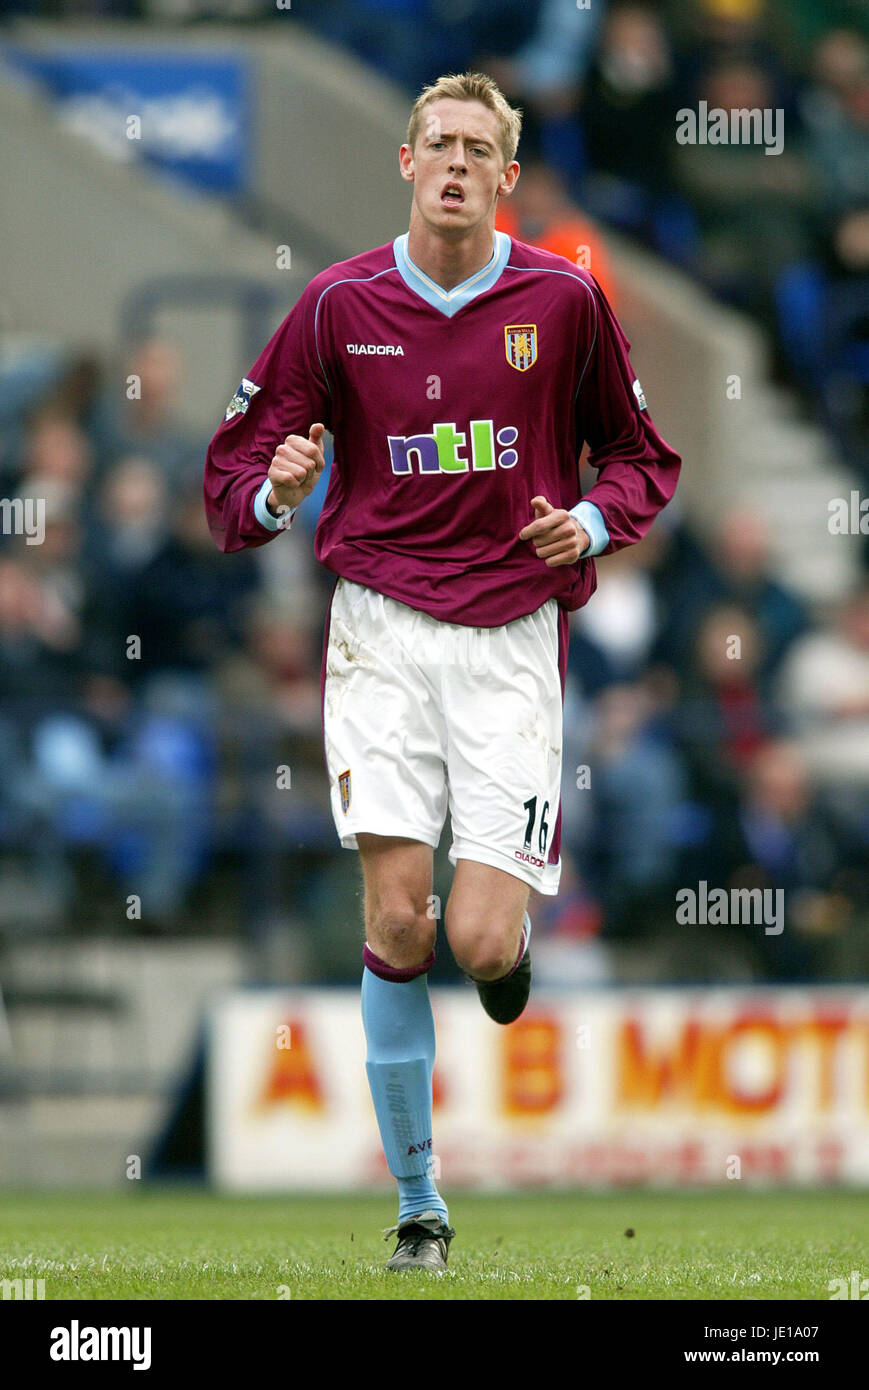 OTD in 2002, 21-year-old Peter Crouch joins Aston Villa on a £5m transfer  from Portsmouth. The 6'7 (200.6 cm) striker (then the tallest player in PL  history) would go on to score